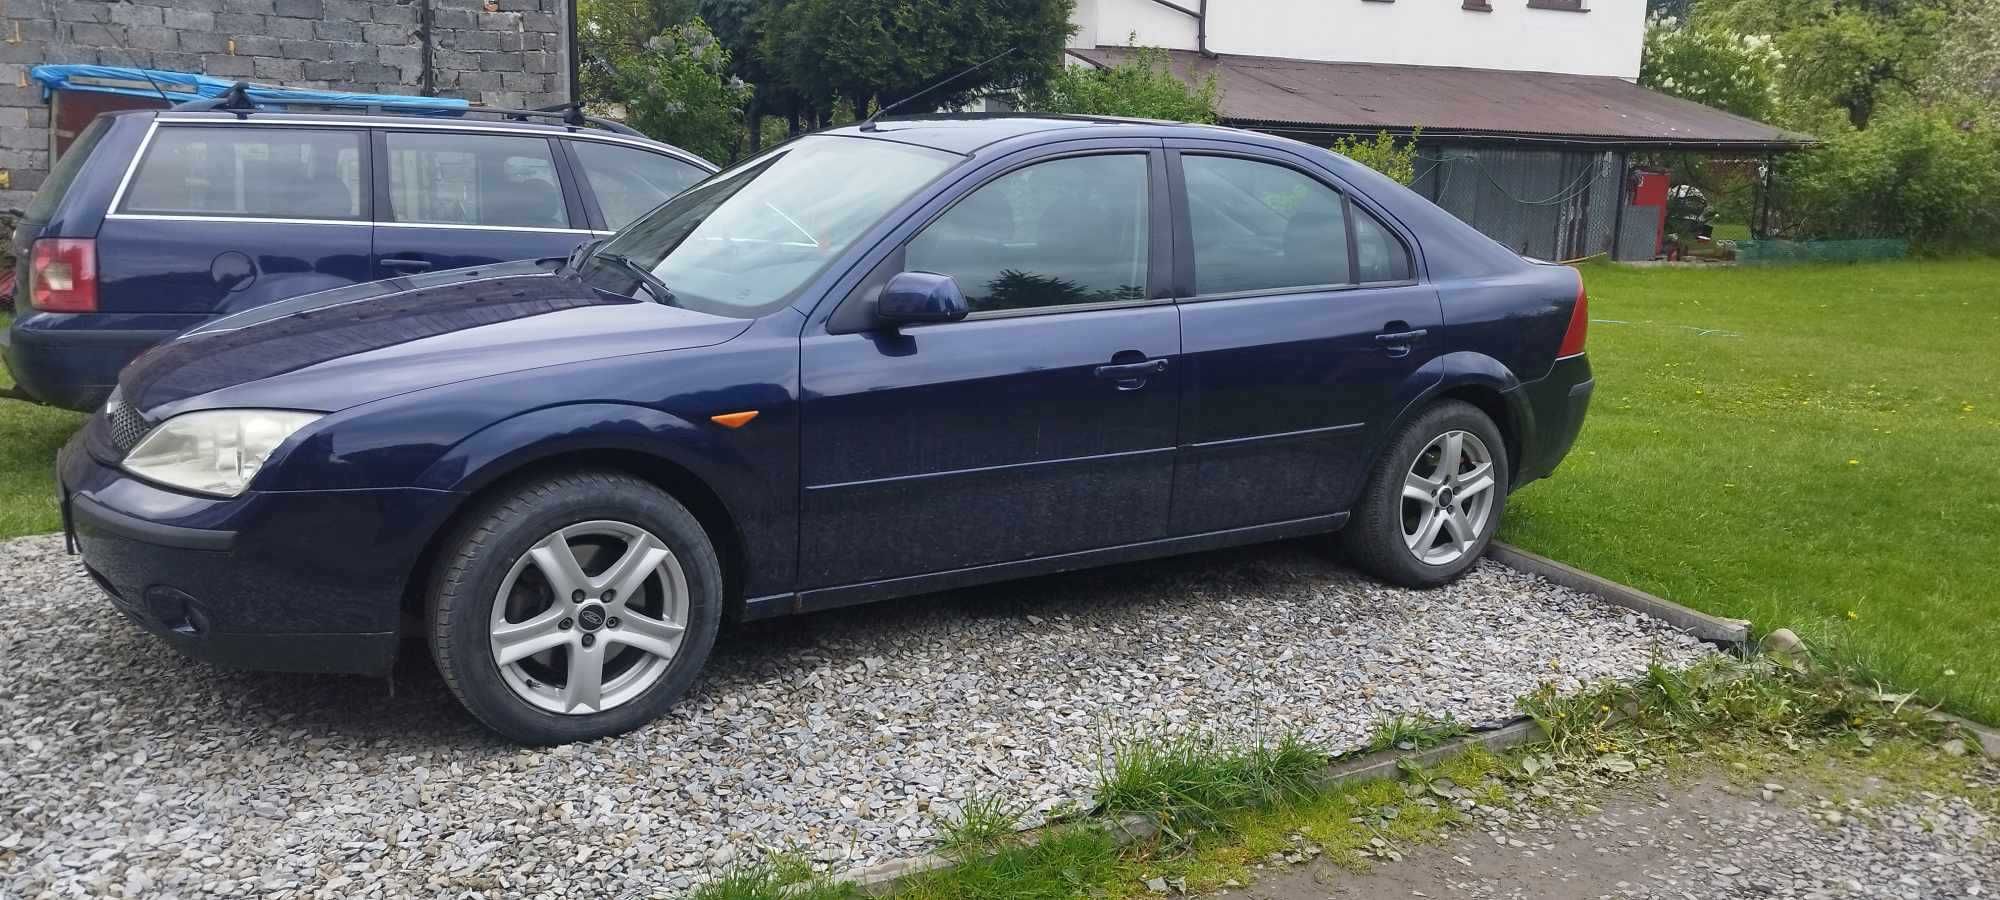 Ford Mondeo 1.8 benzyna 2001r